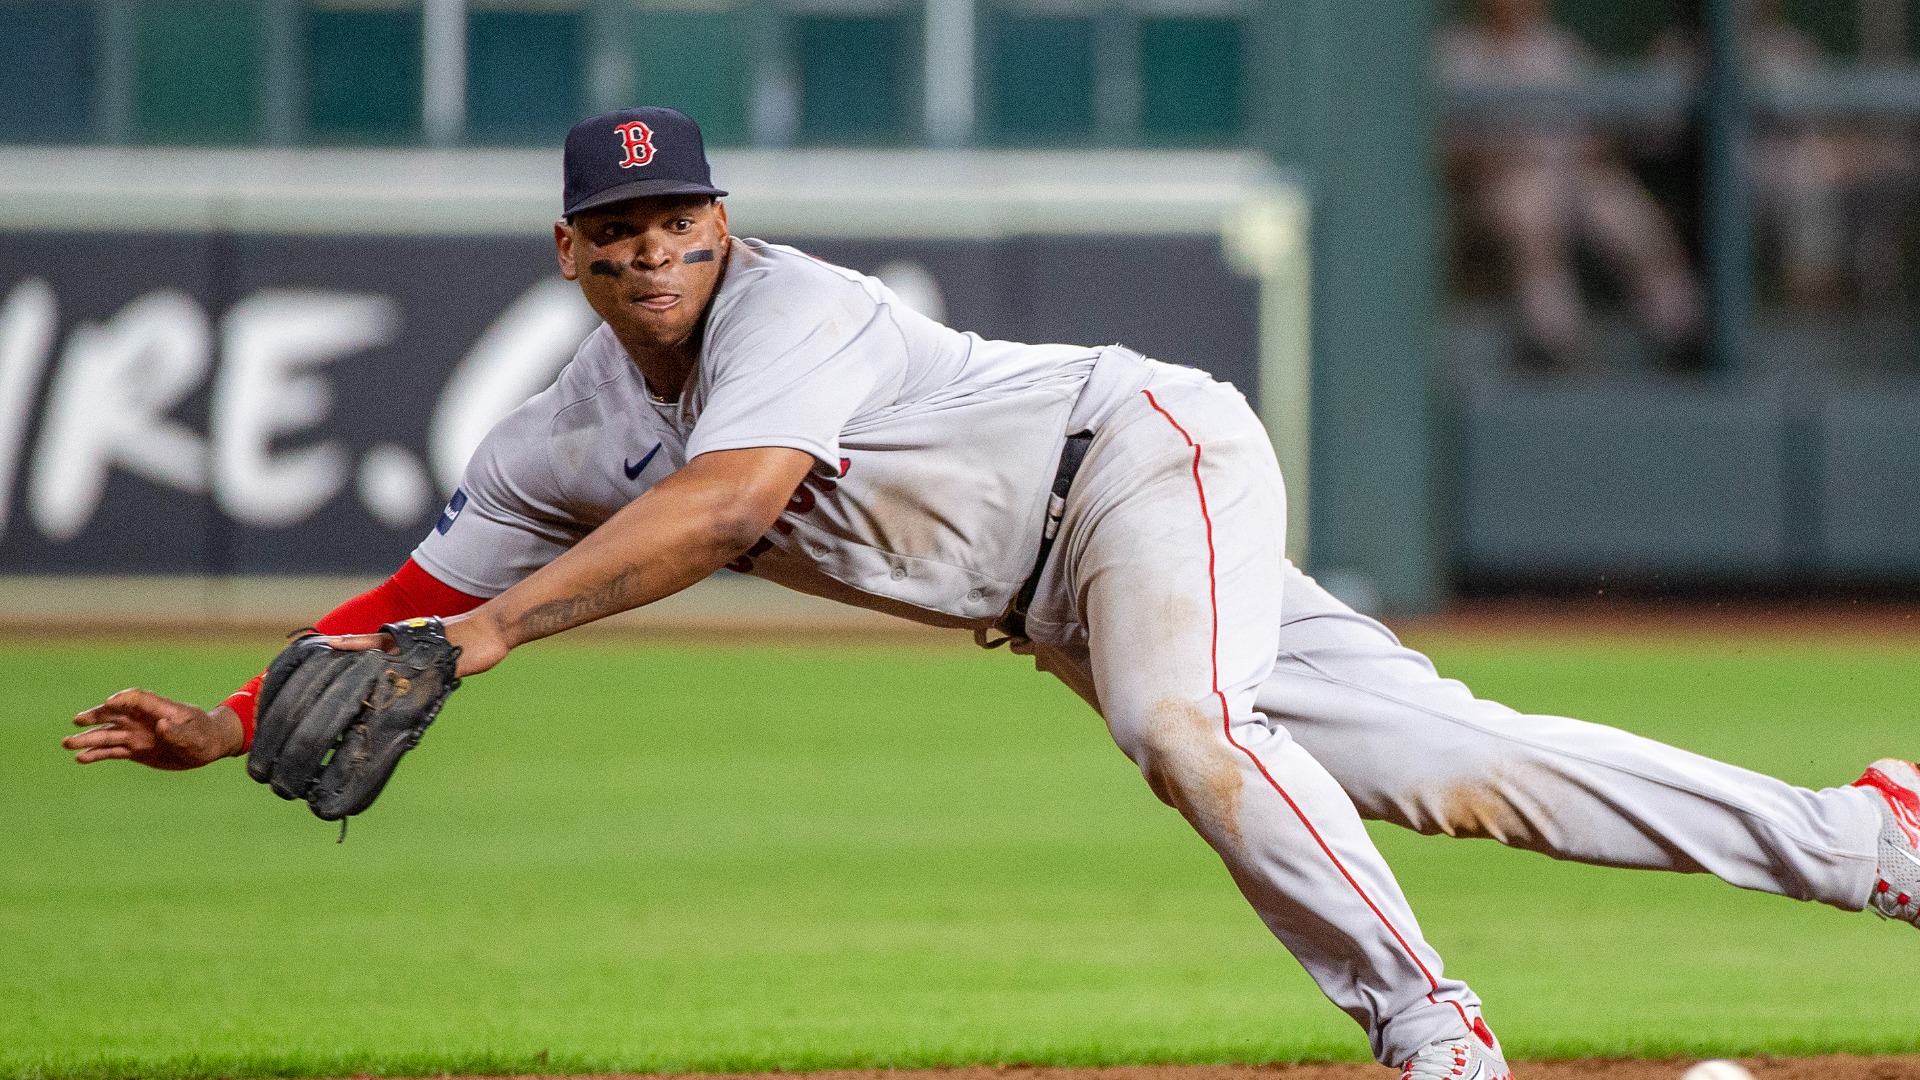 Red Sox - 2, Orioles - 4 : Devers Defense Costs Red Sox. - Over